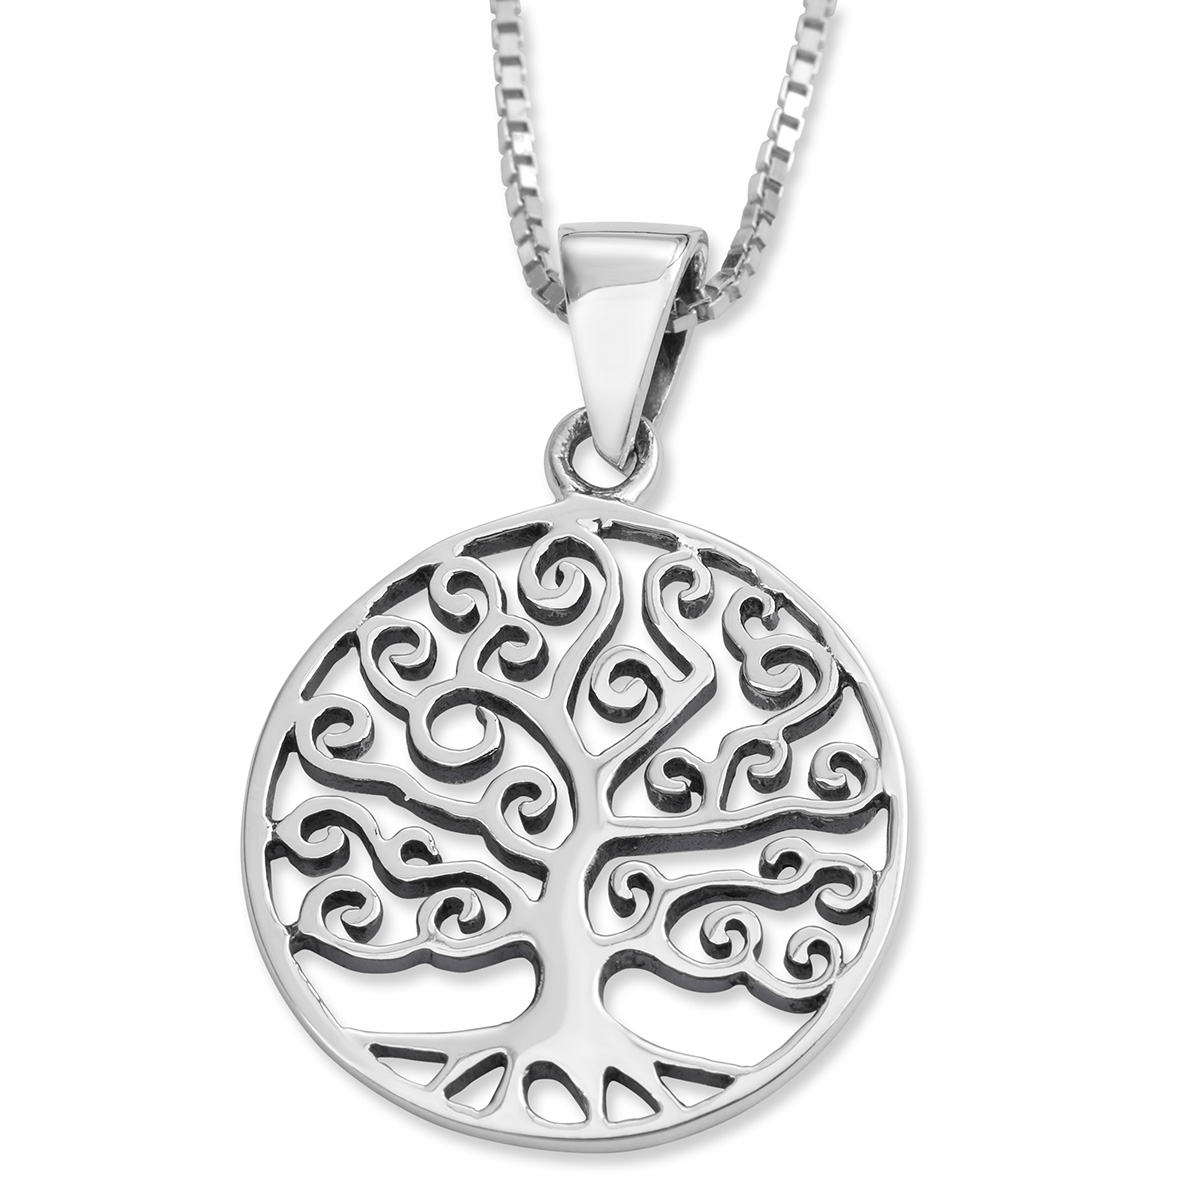 Ornate Jewels Necklaces And Pendants : Buy 925 Sterling Silver